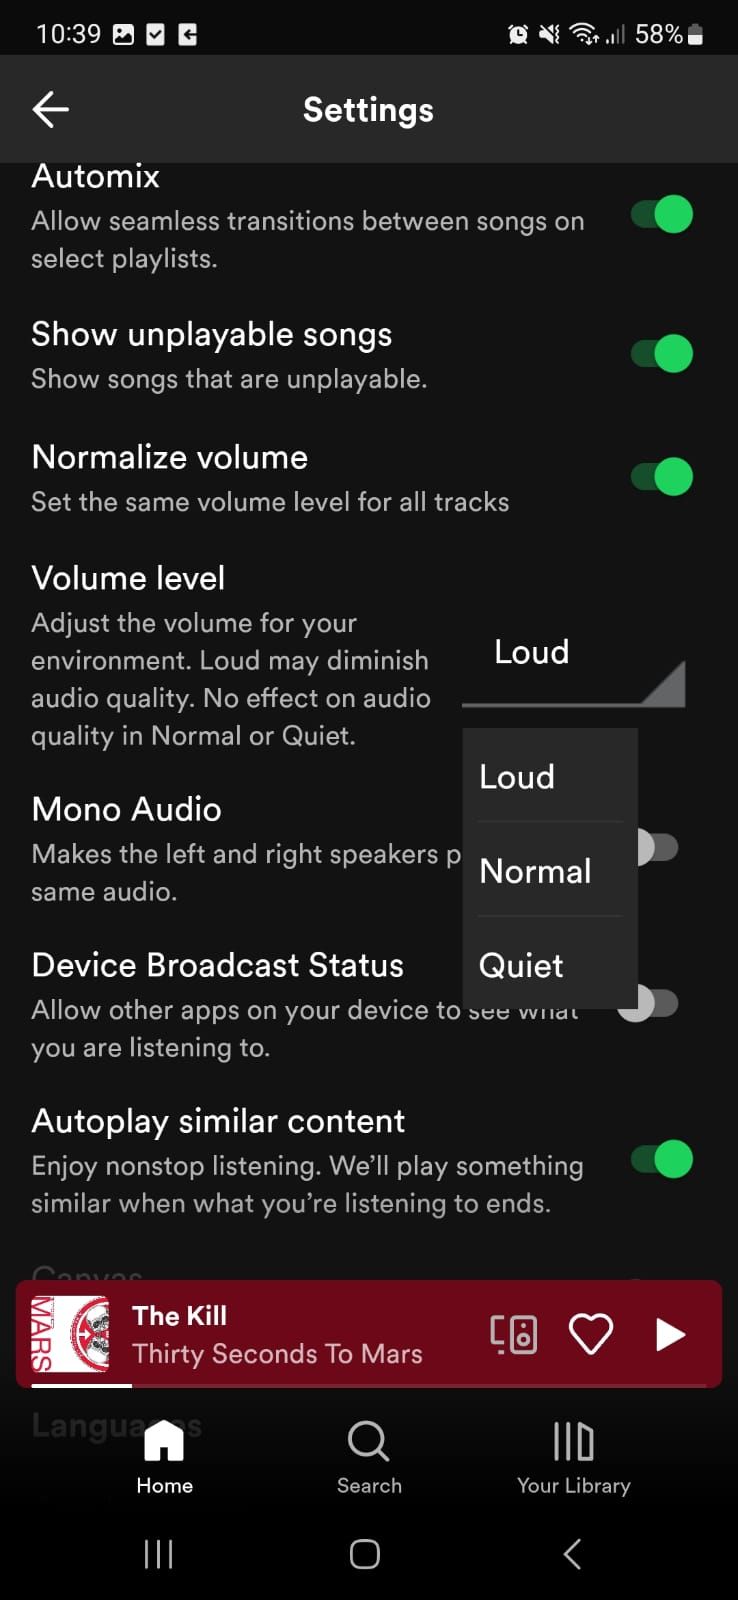 Set volume level to loud on Spotify mobile app